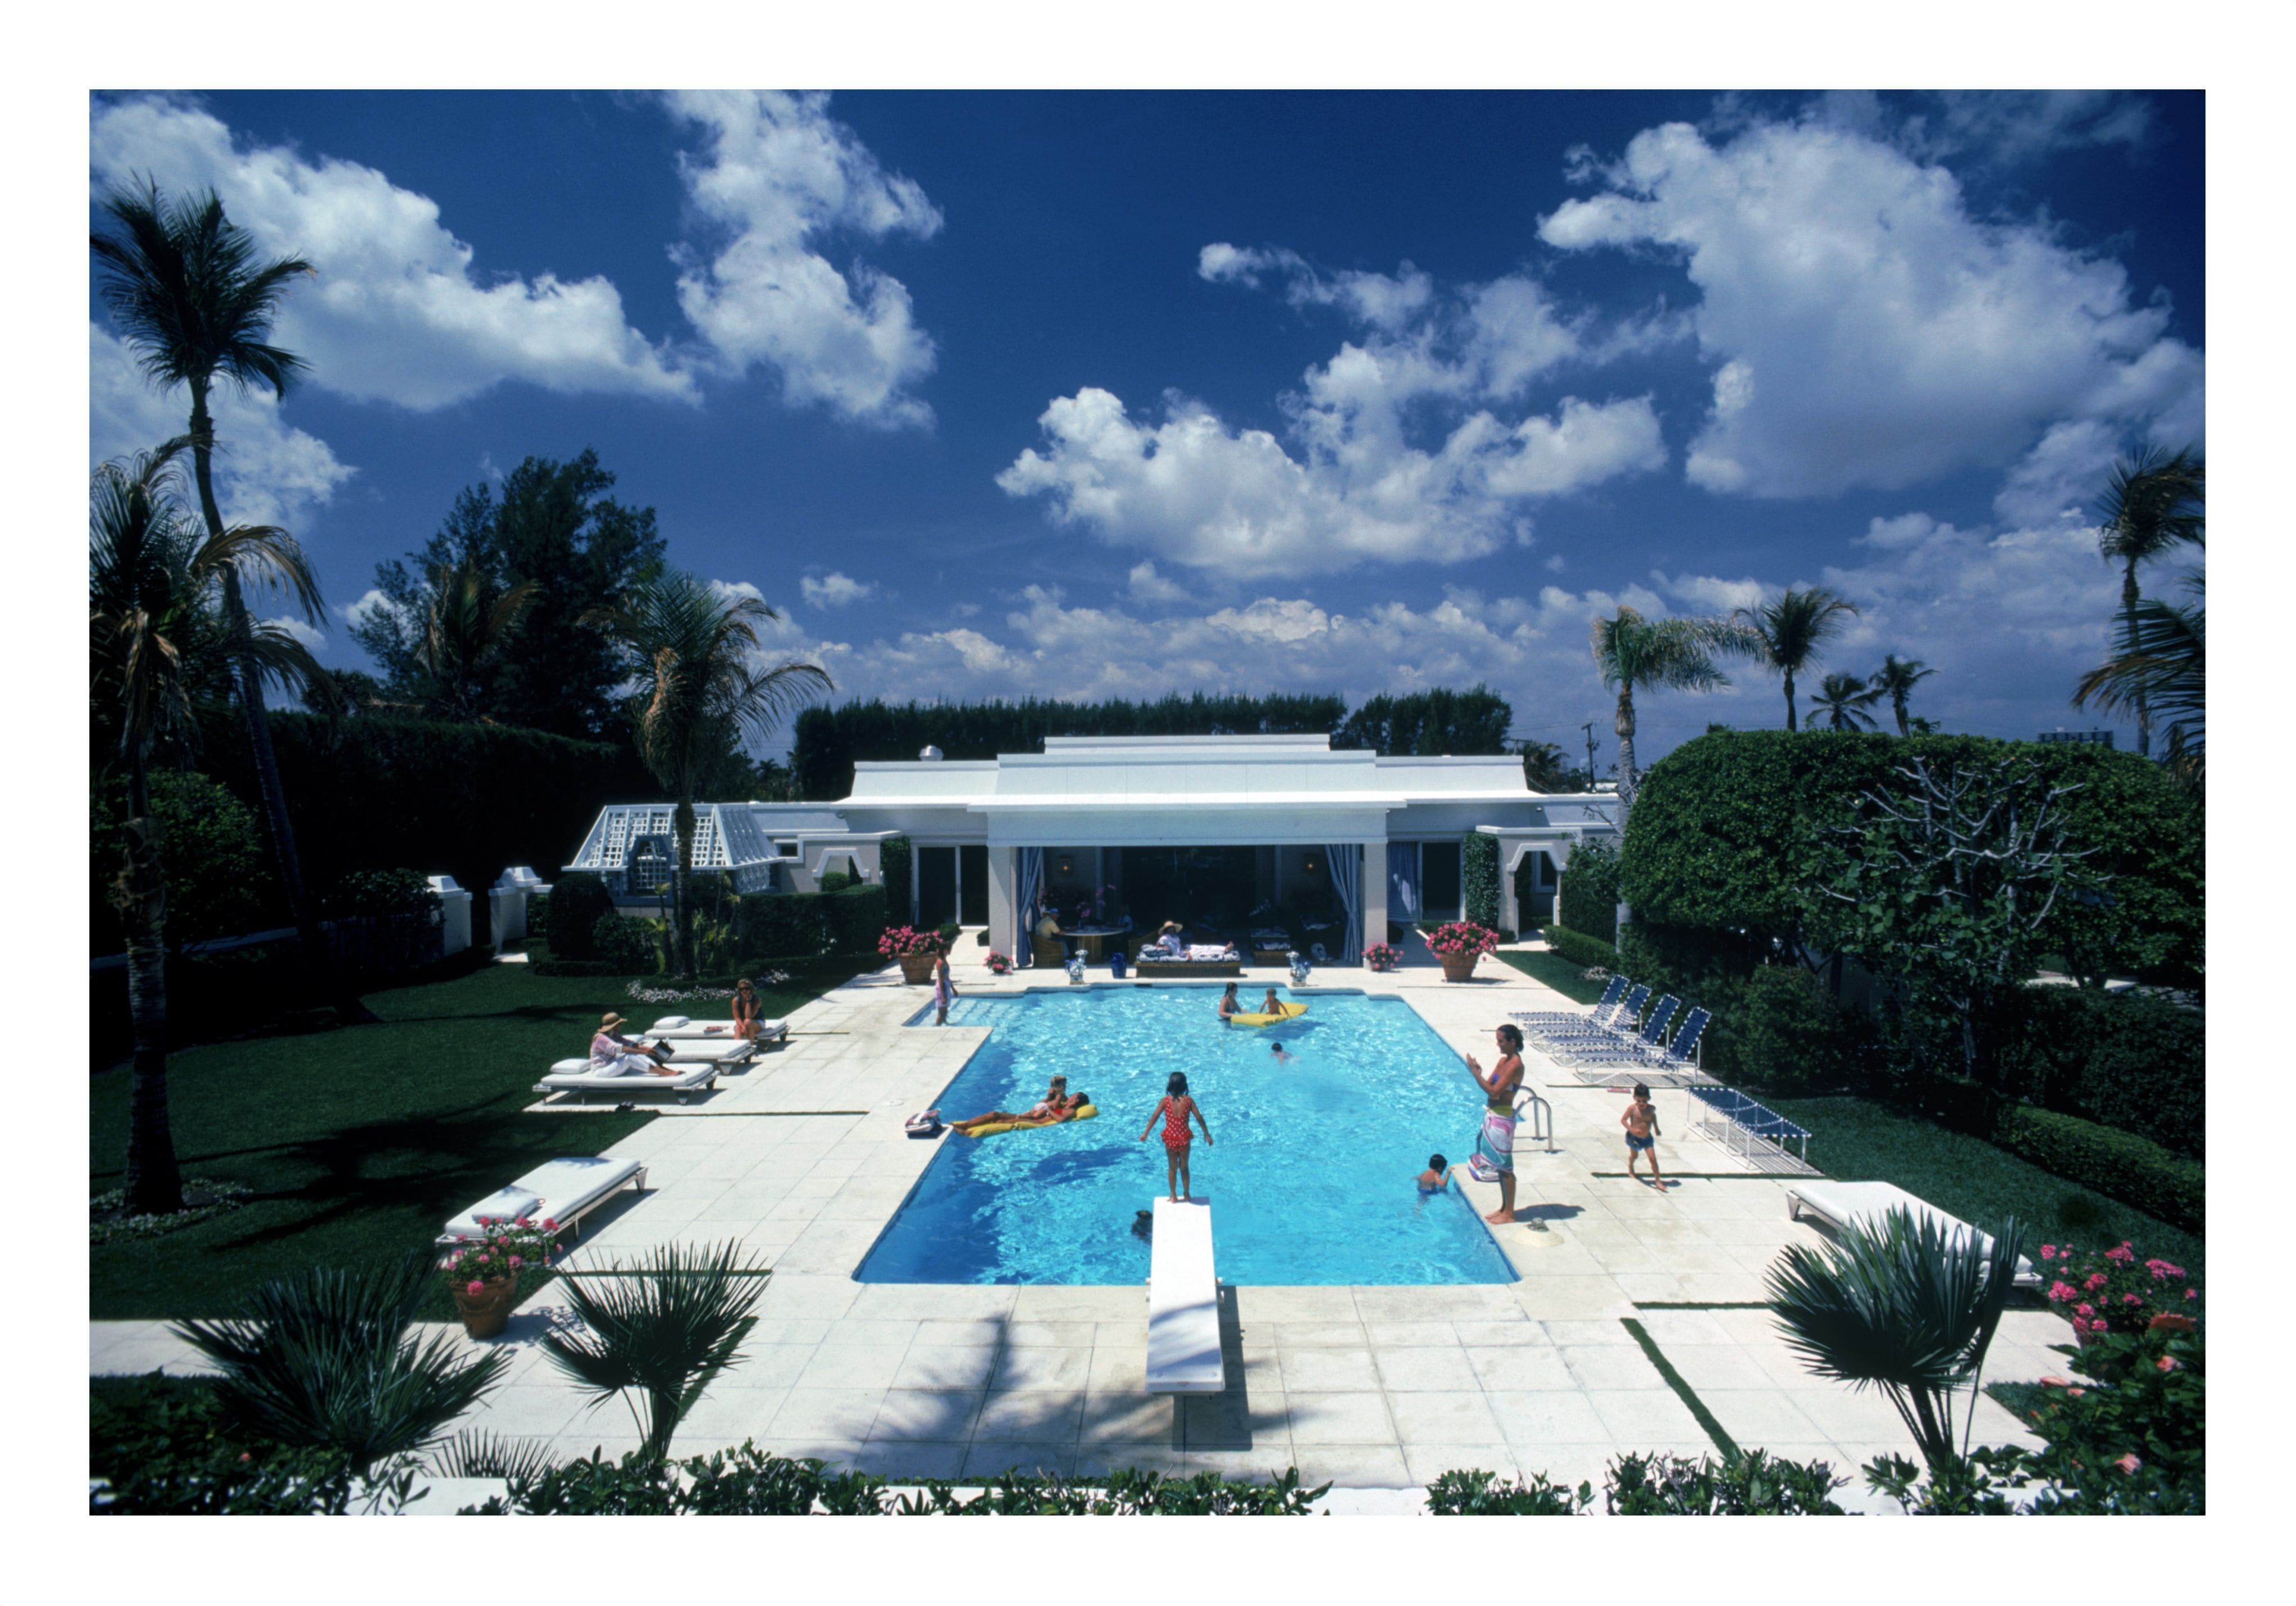 Image of Pool In Palm Beach, C-Type Print artwork by Slim Aarons, free delivery